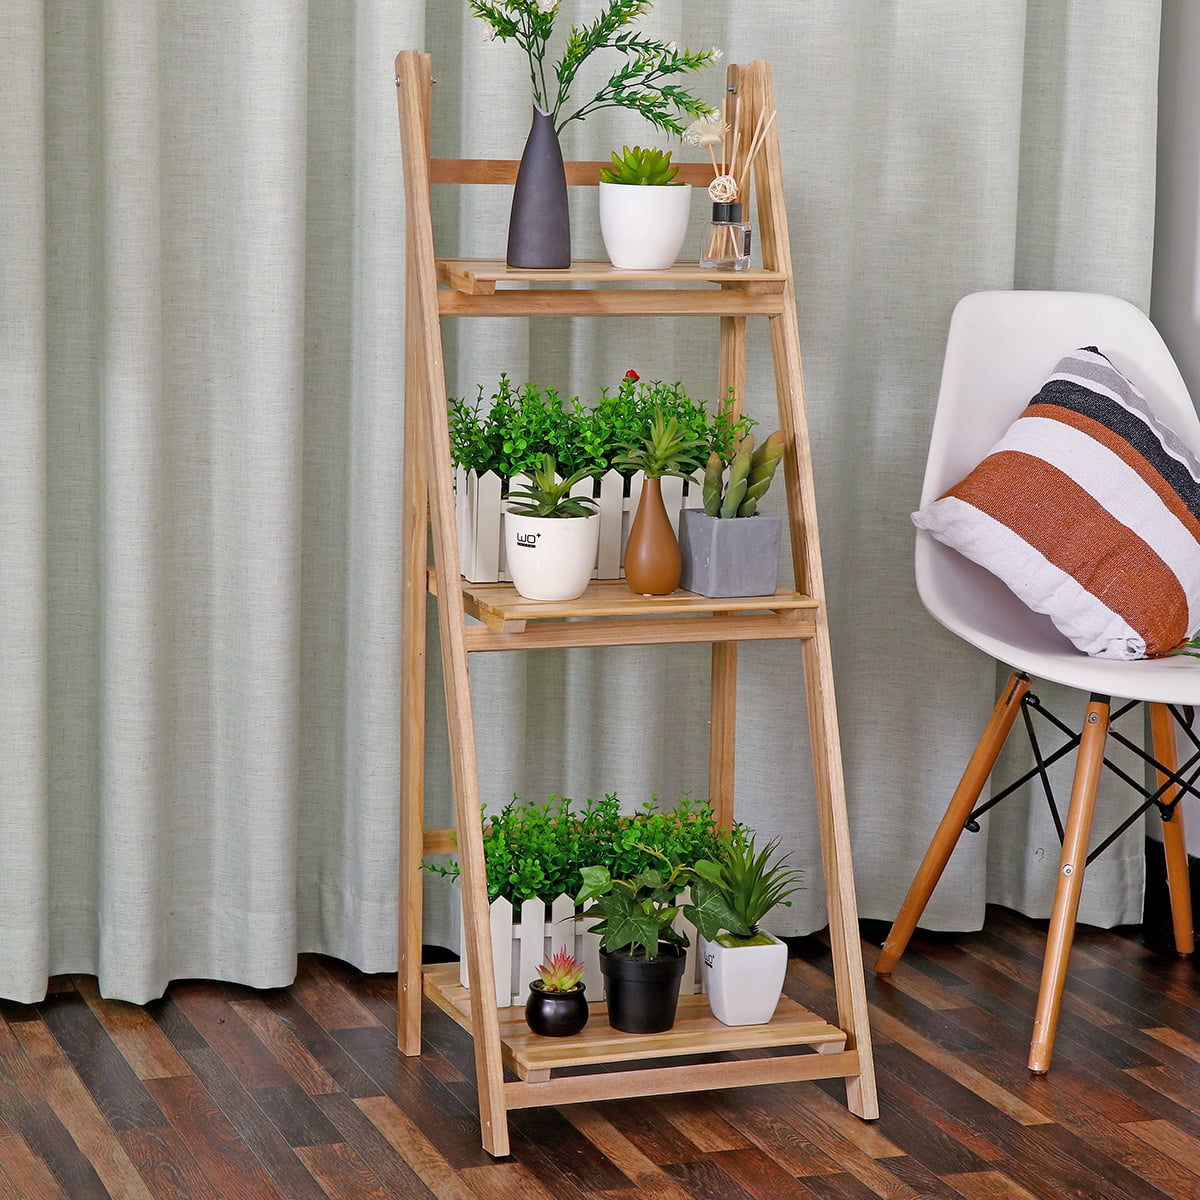 Details about   3 Tier Foldable Bamboo Ladder Flower Plant Stand Storage Shelving Hanging Rack 